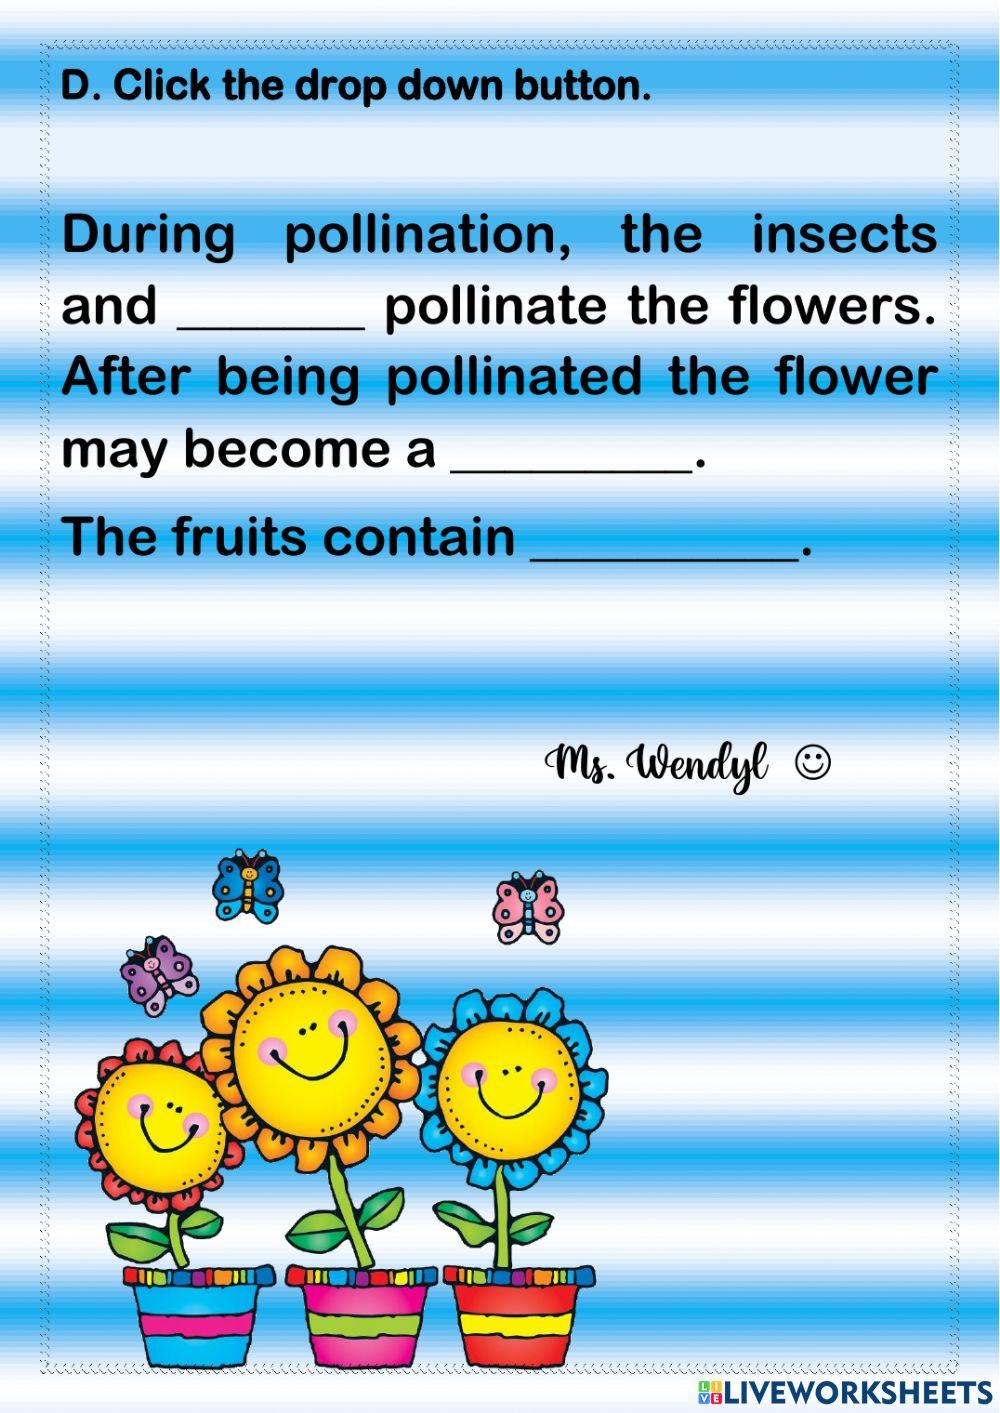 Life Cycle of the Flowering Plant